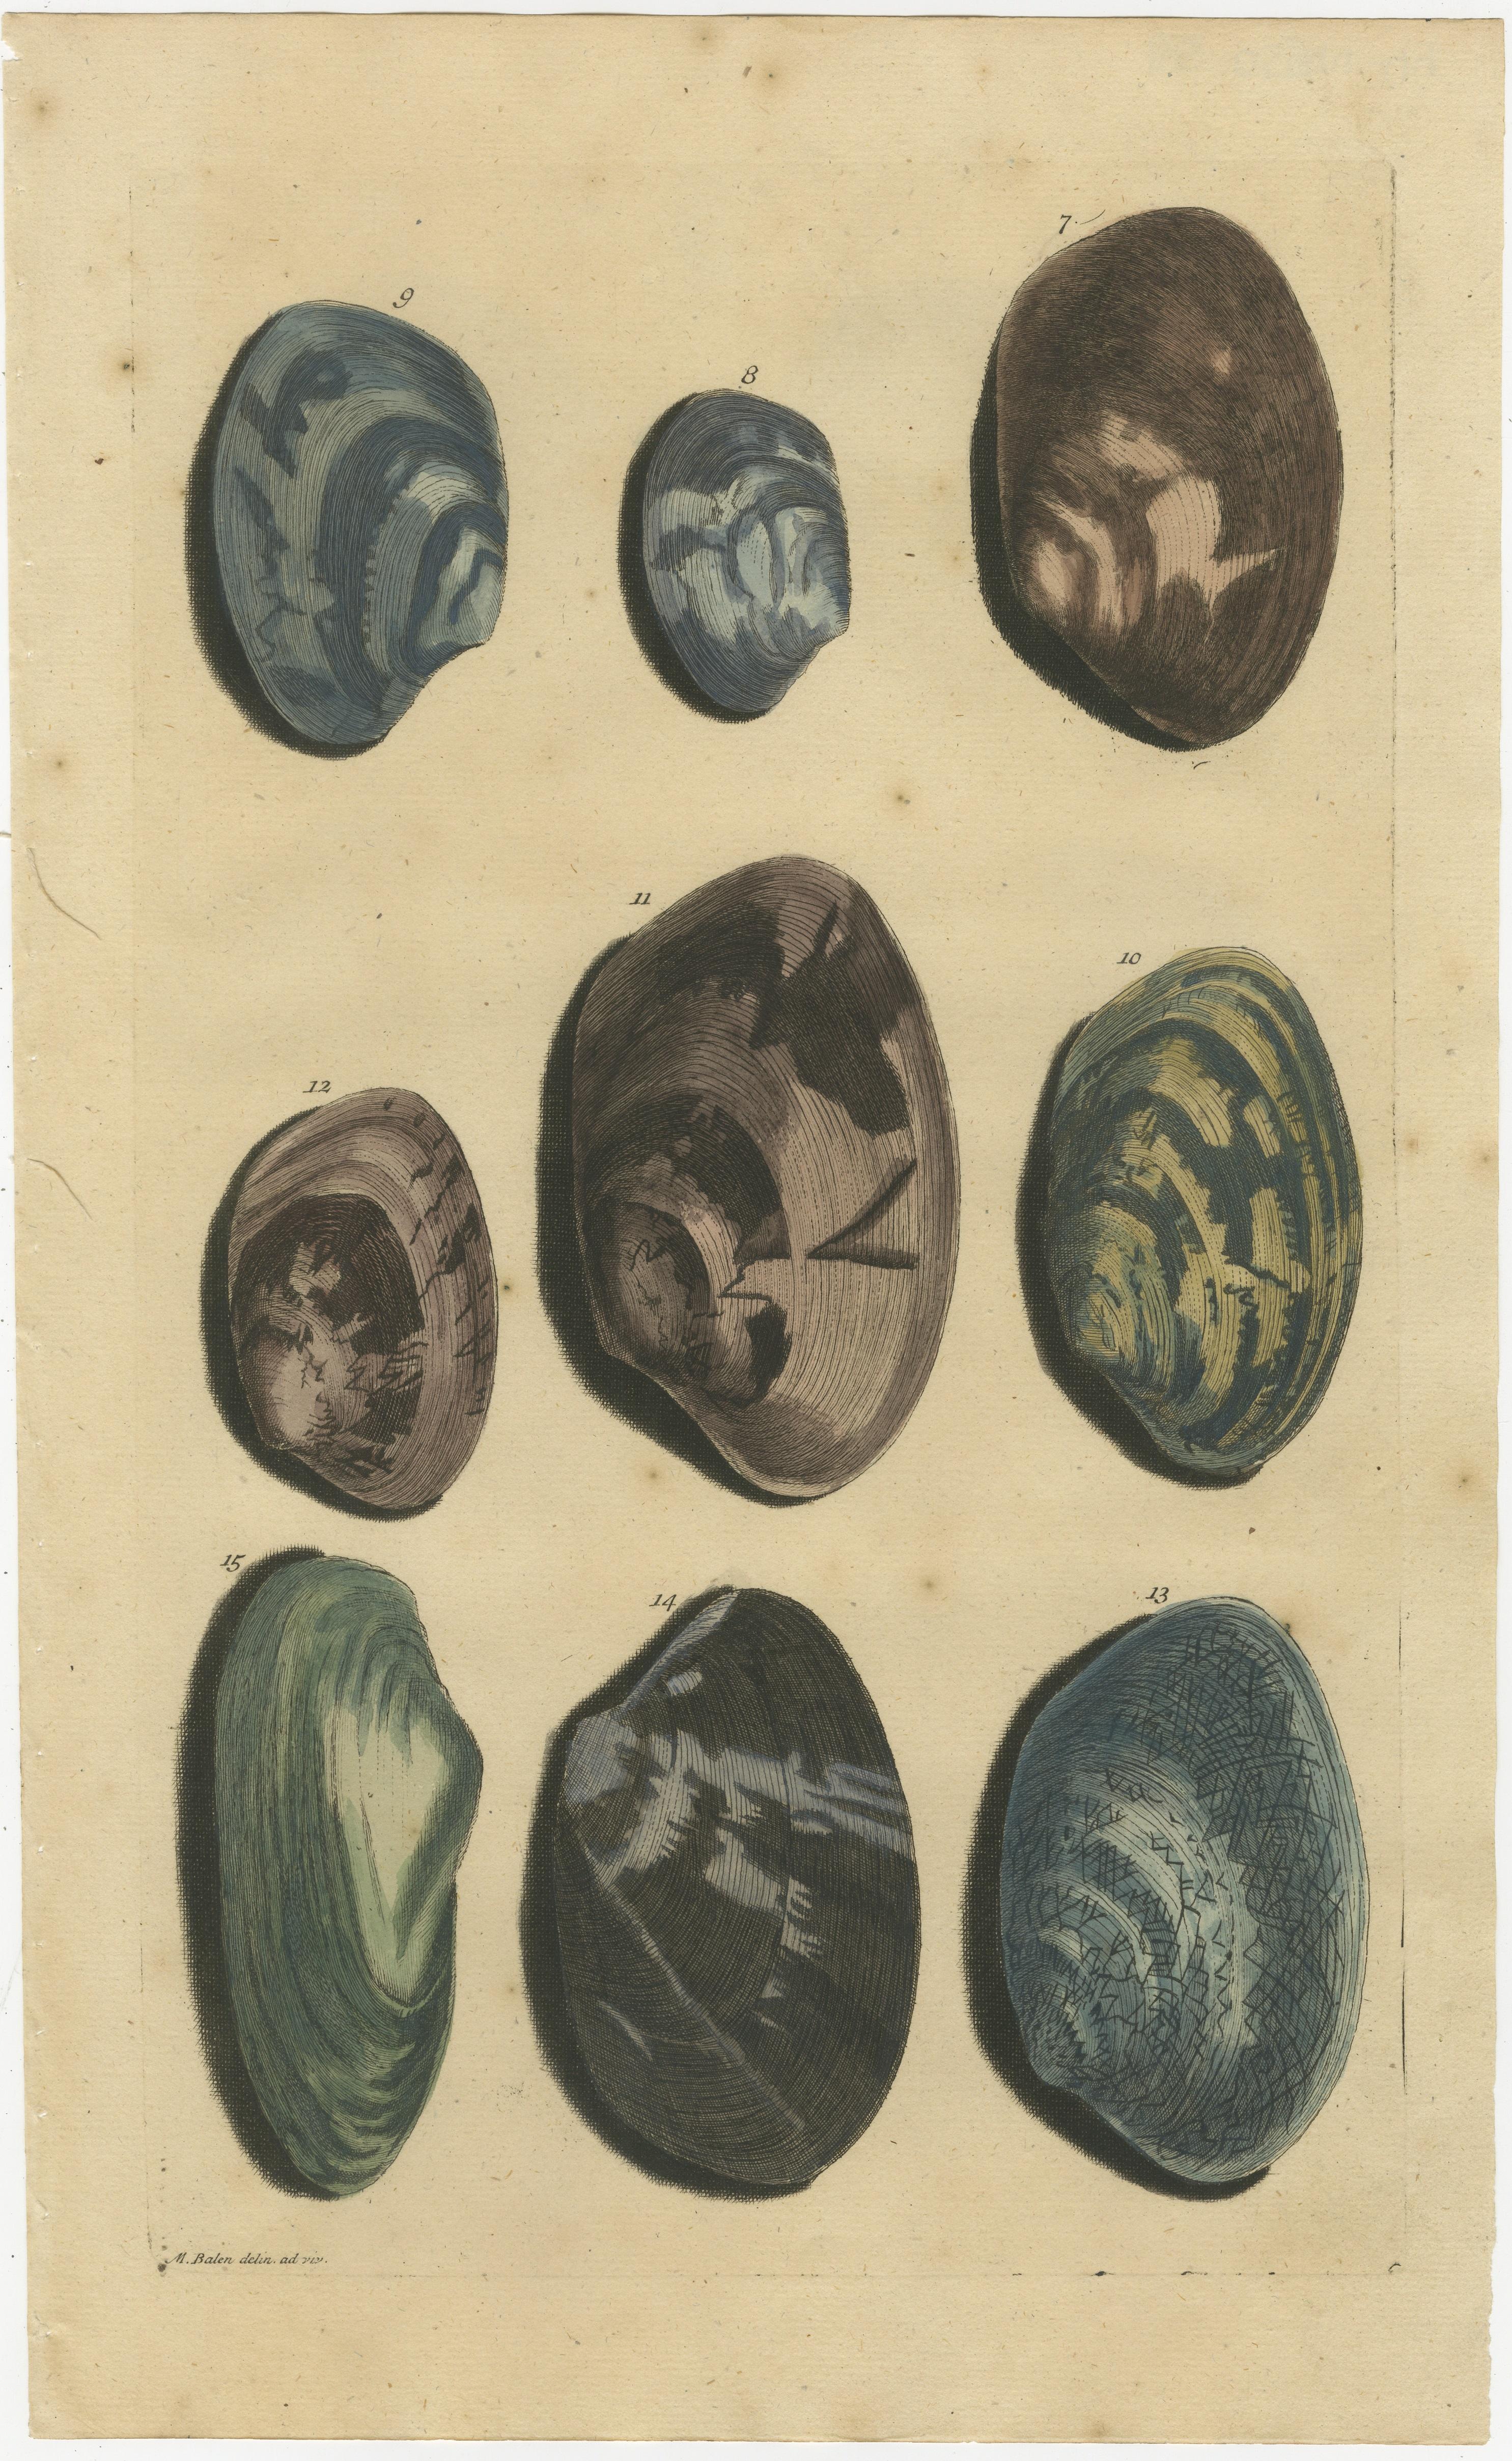 Set of two antique prints of various sea shells and molluscs. These print originate from 'Oud en Nieuw Oost-Indiën' by F. Valentijn.

François Valentyn or Valentijn (17 April 1666 – 6 August 1727) was a Dutch Calvinist minister, naturalist and